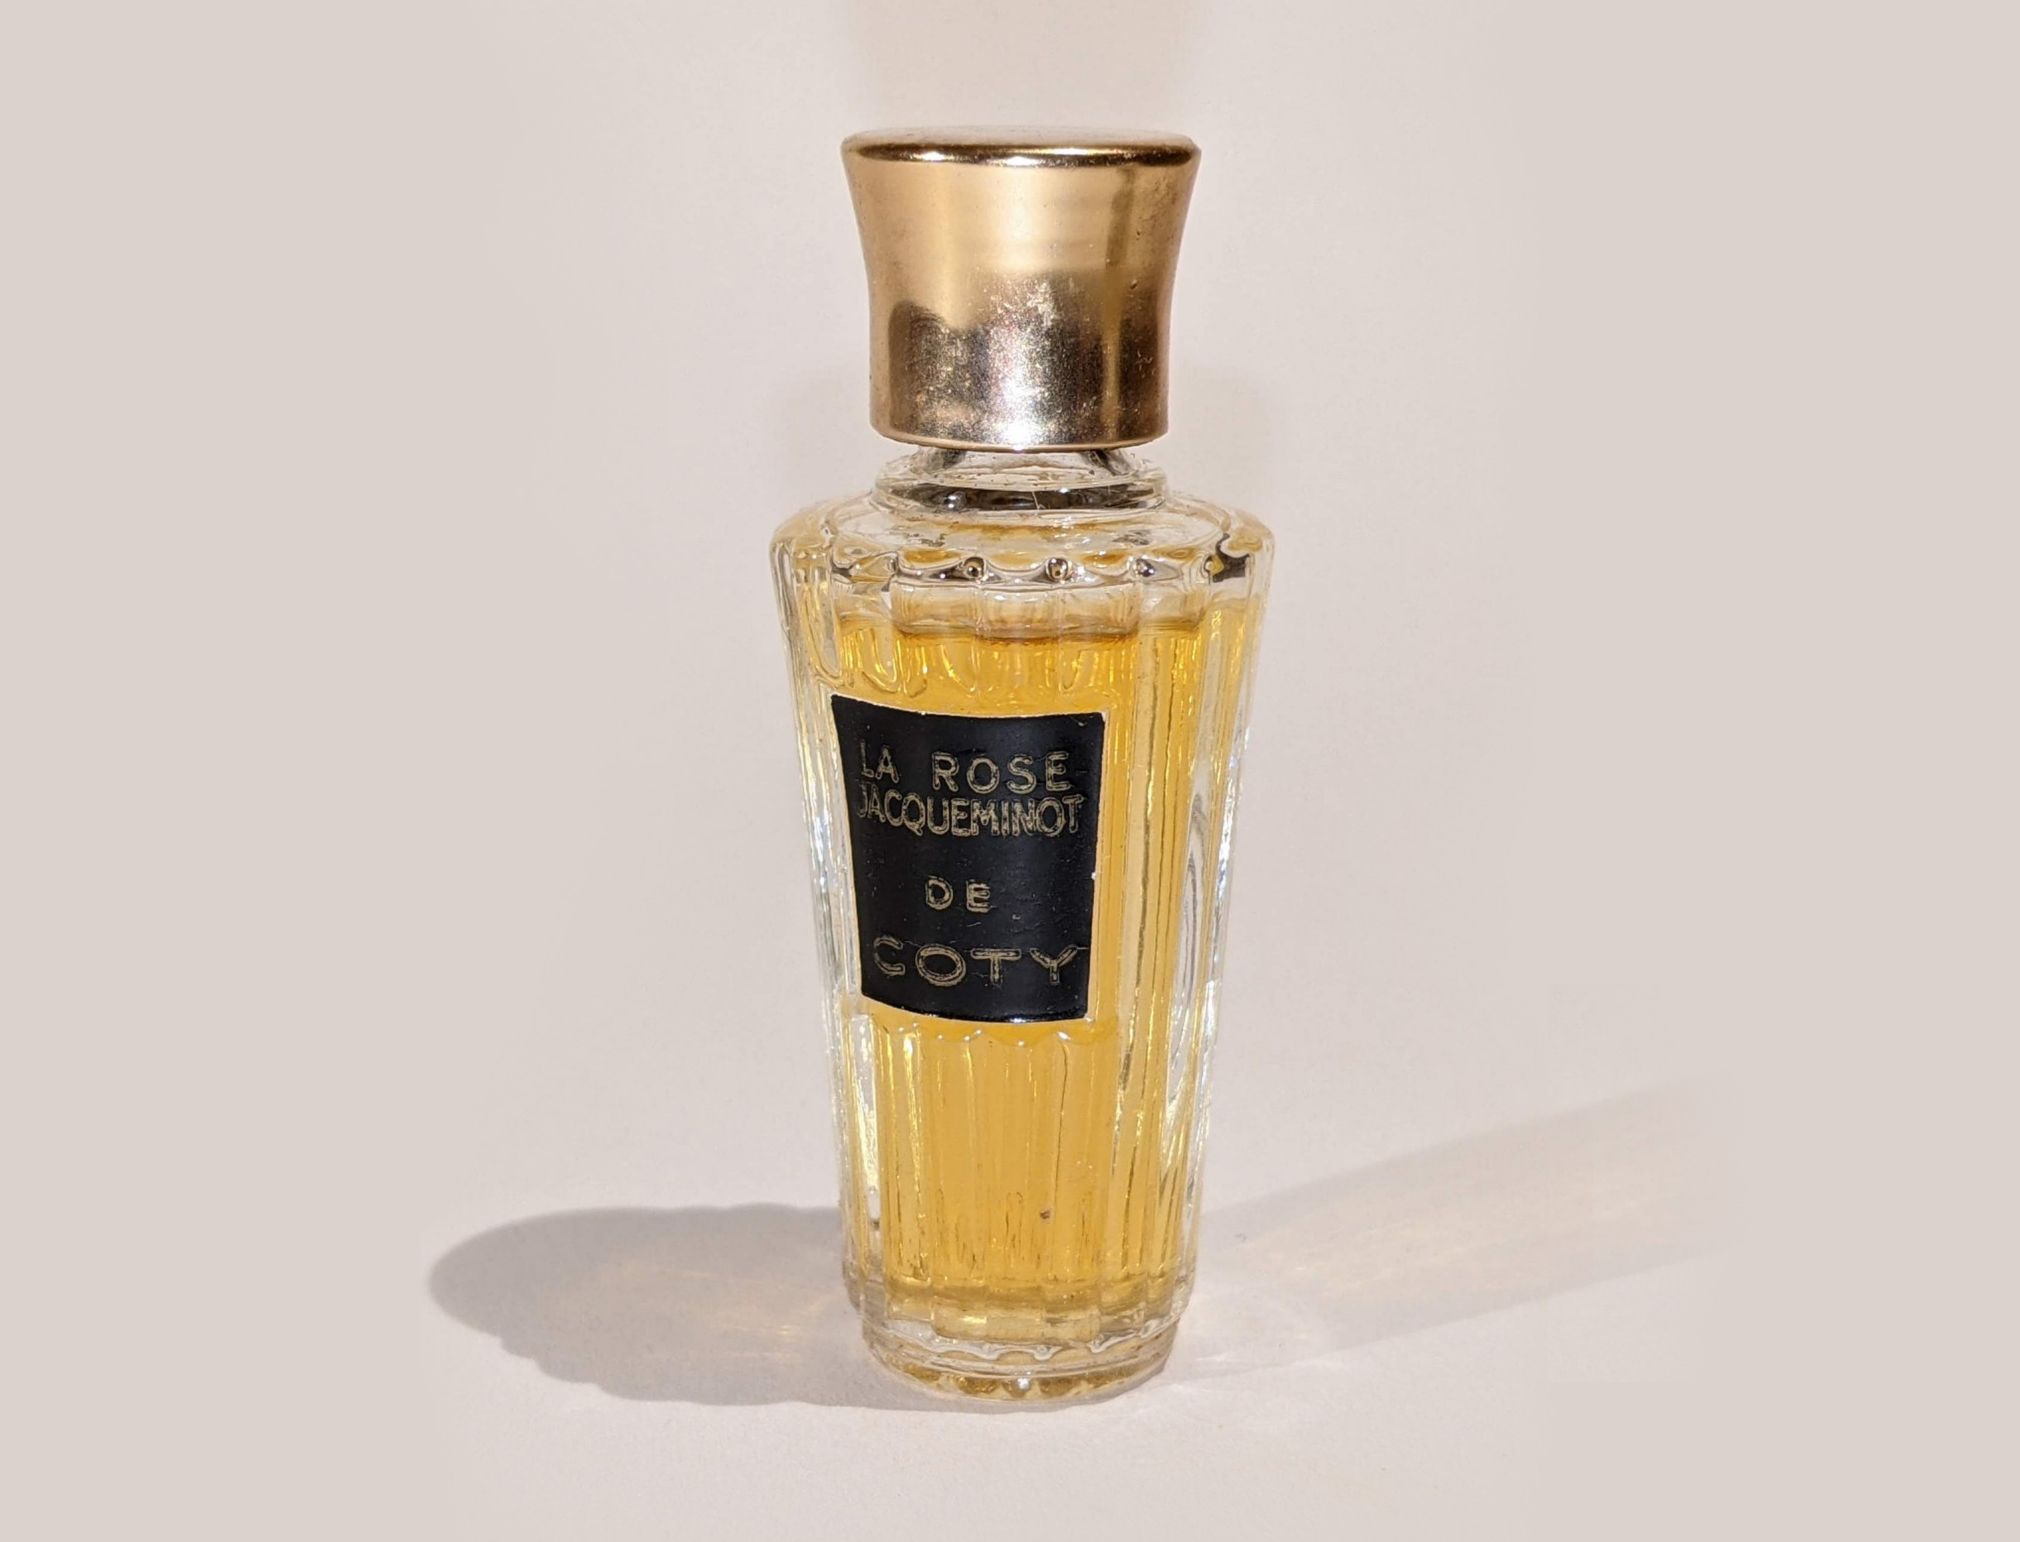 La Rose Jacqueminot Coty perfume - a fragrance for women 2004